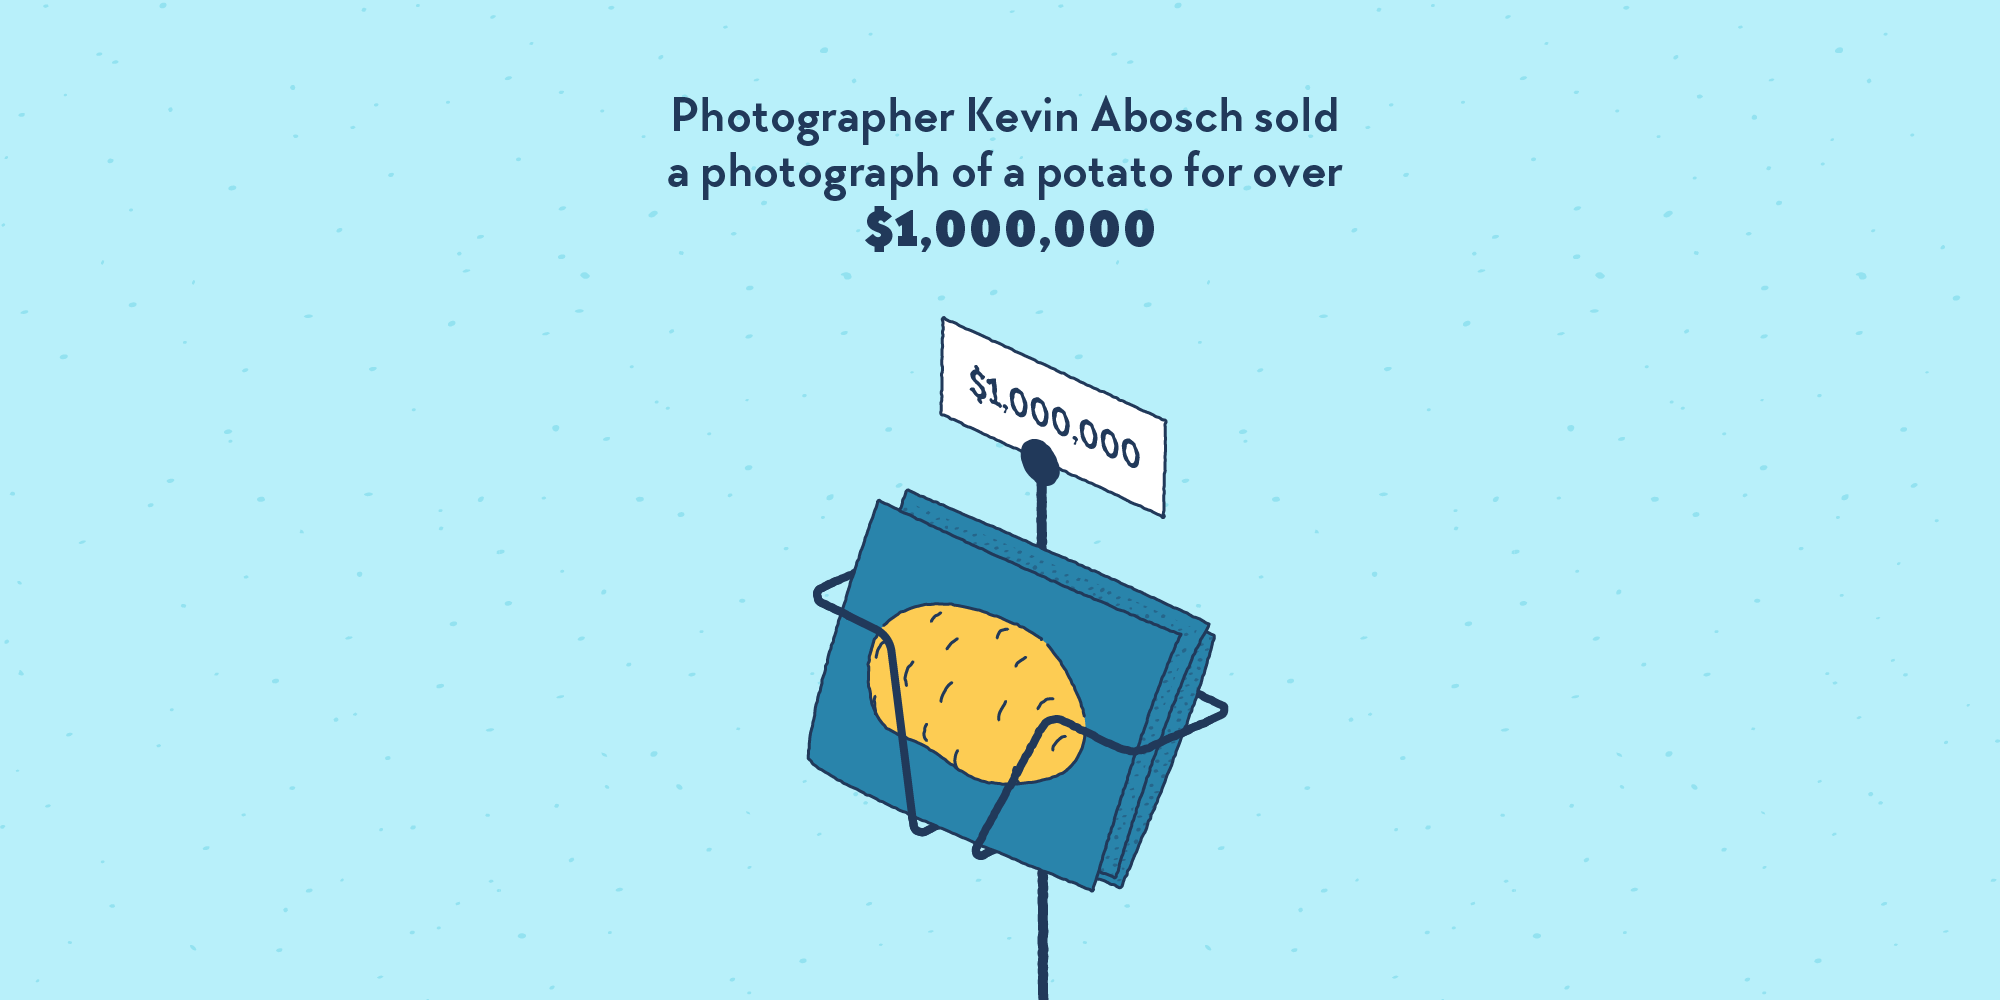 A few photos on a postcard stand, depicting a single potato. A little price tag indicates one million dollars.